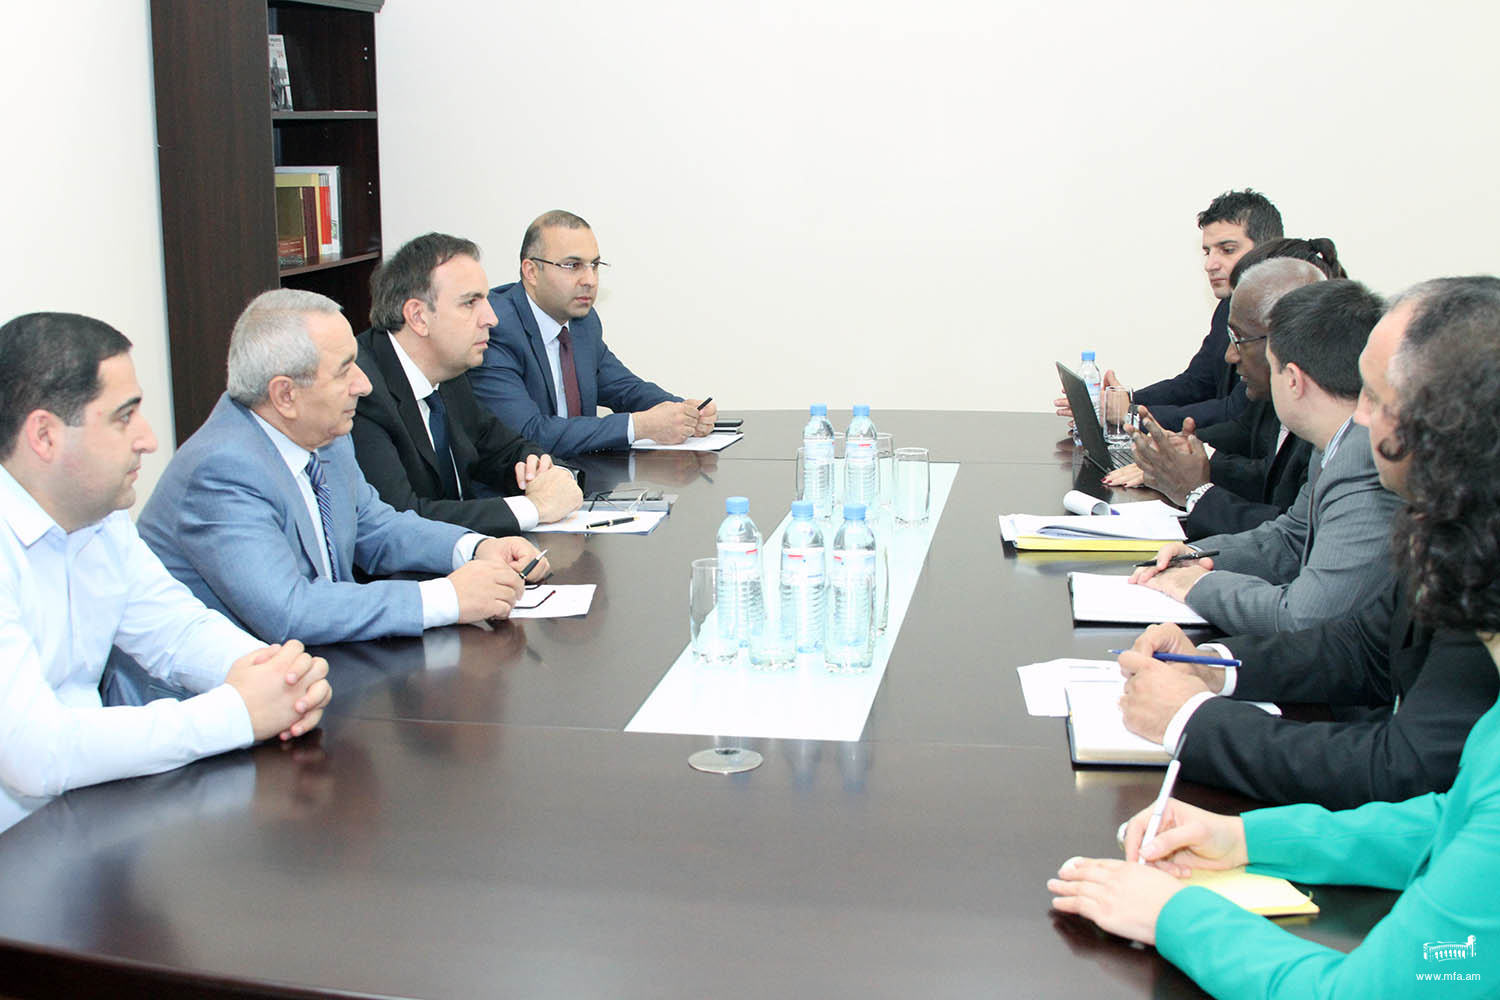 Deputy Foreign Minister had a meeting with the World Bank representatives